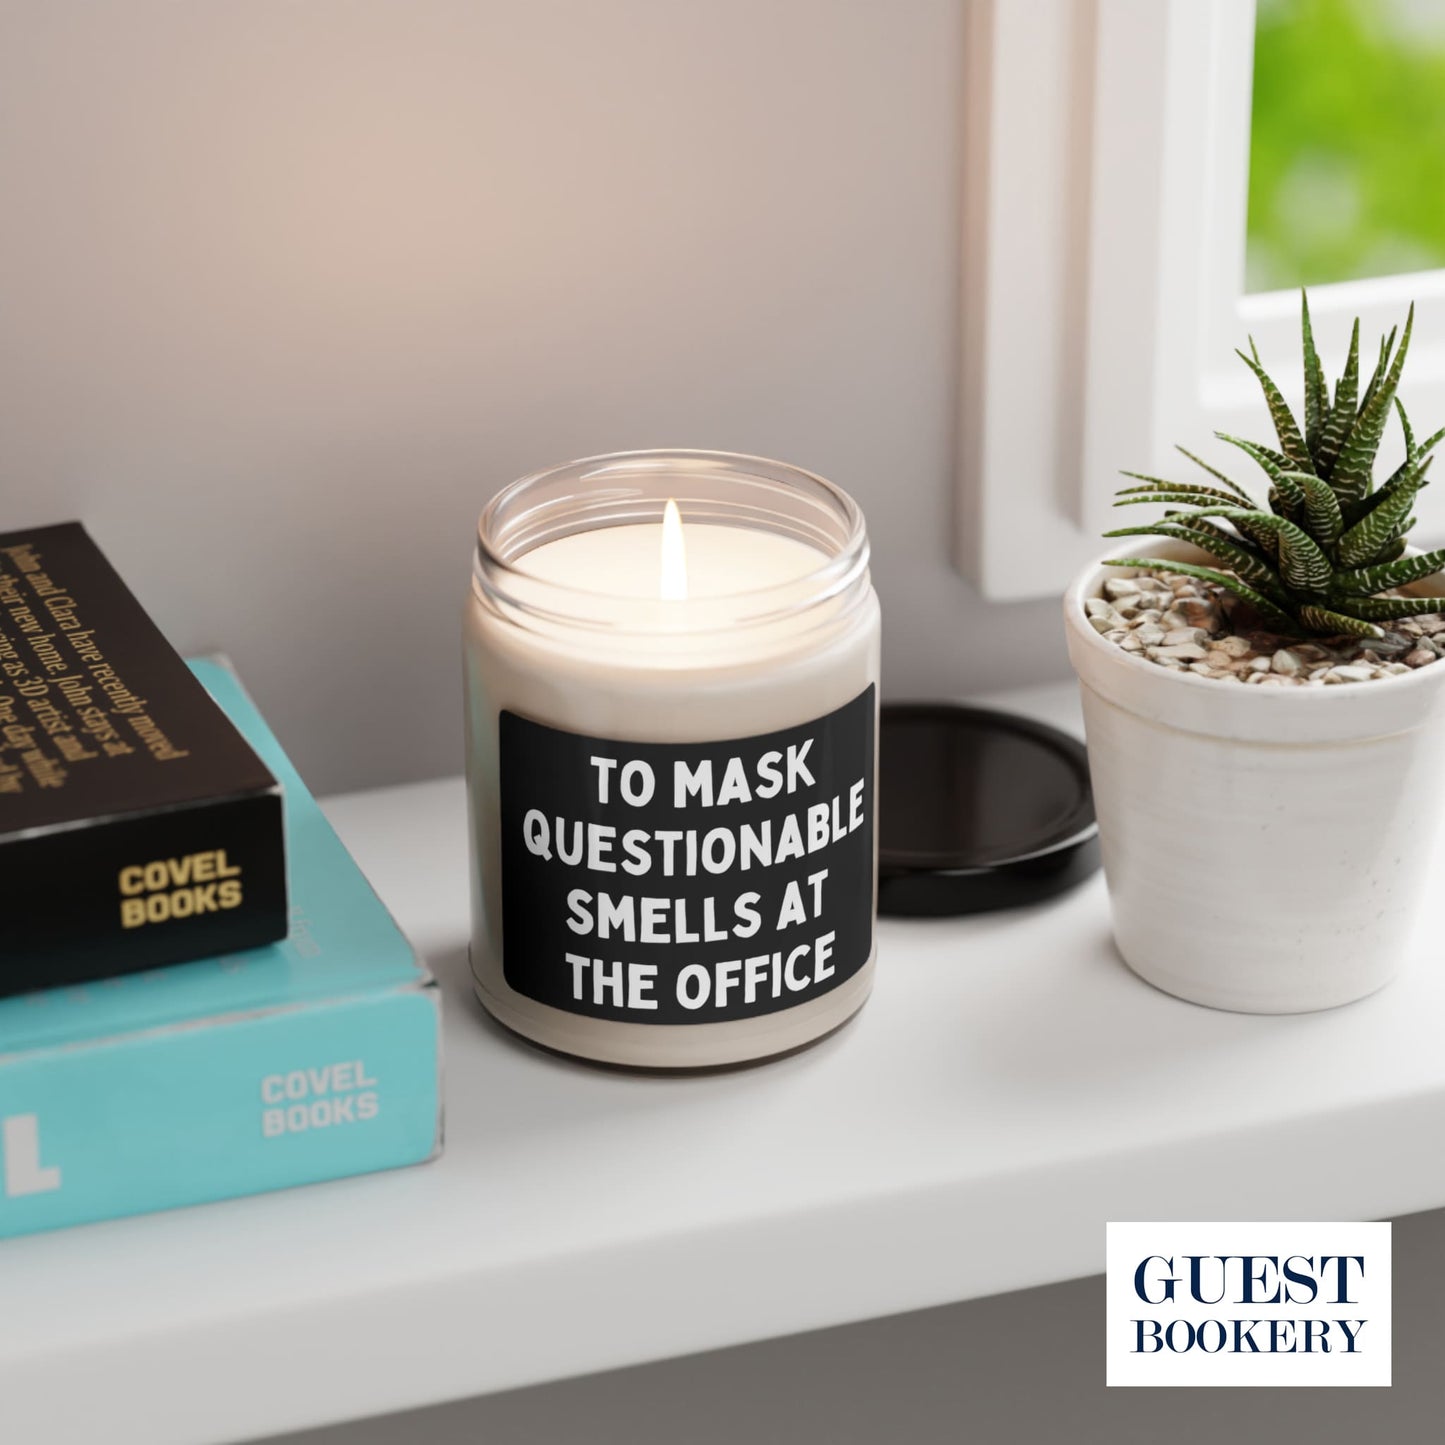 To Mask Questionable Smells at the Office Candle